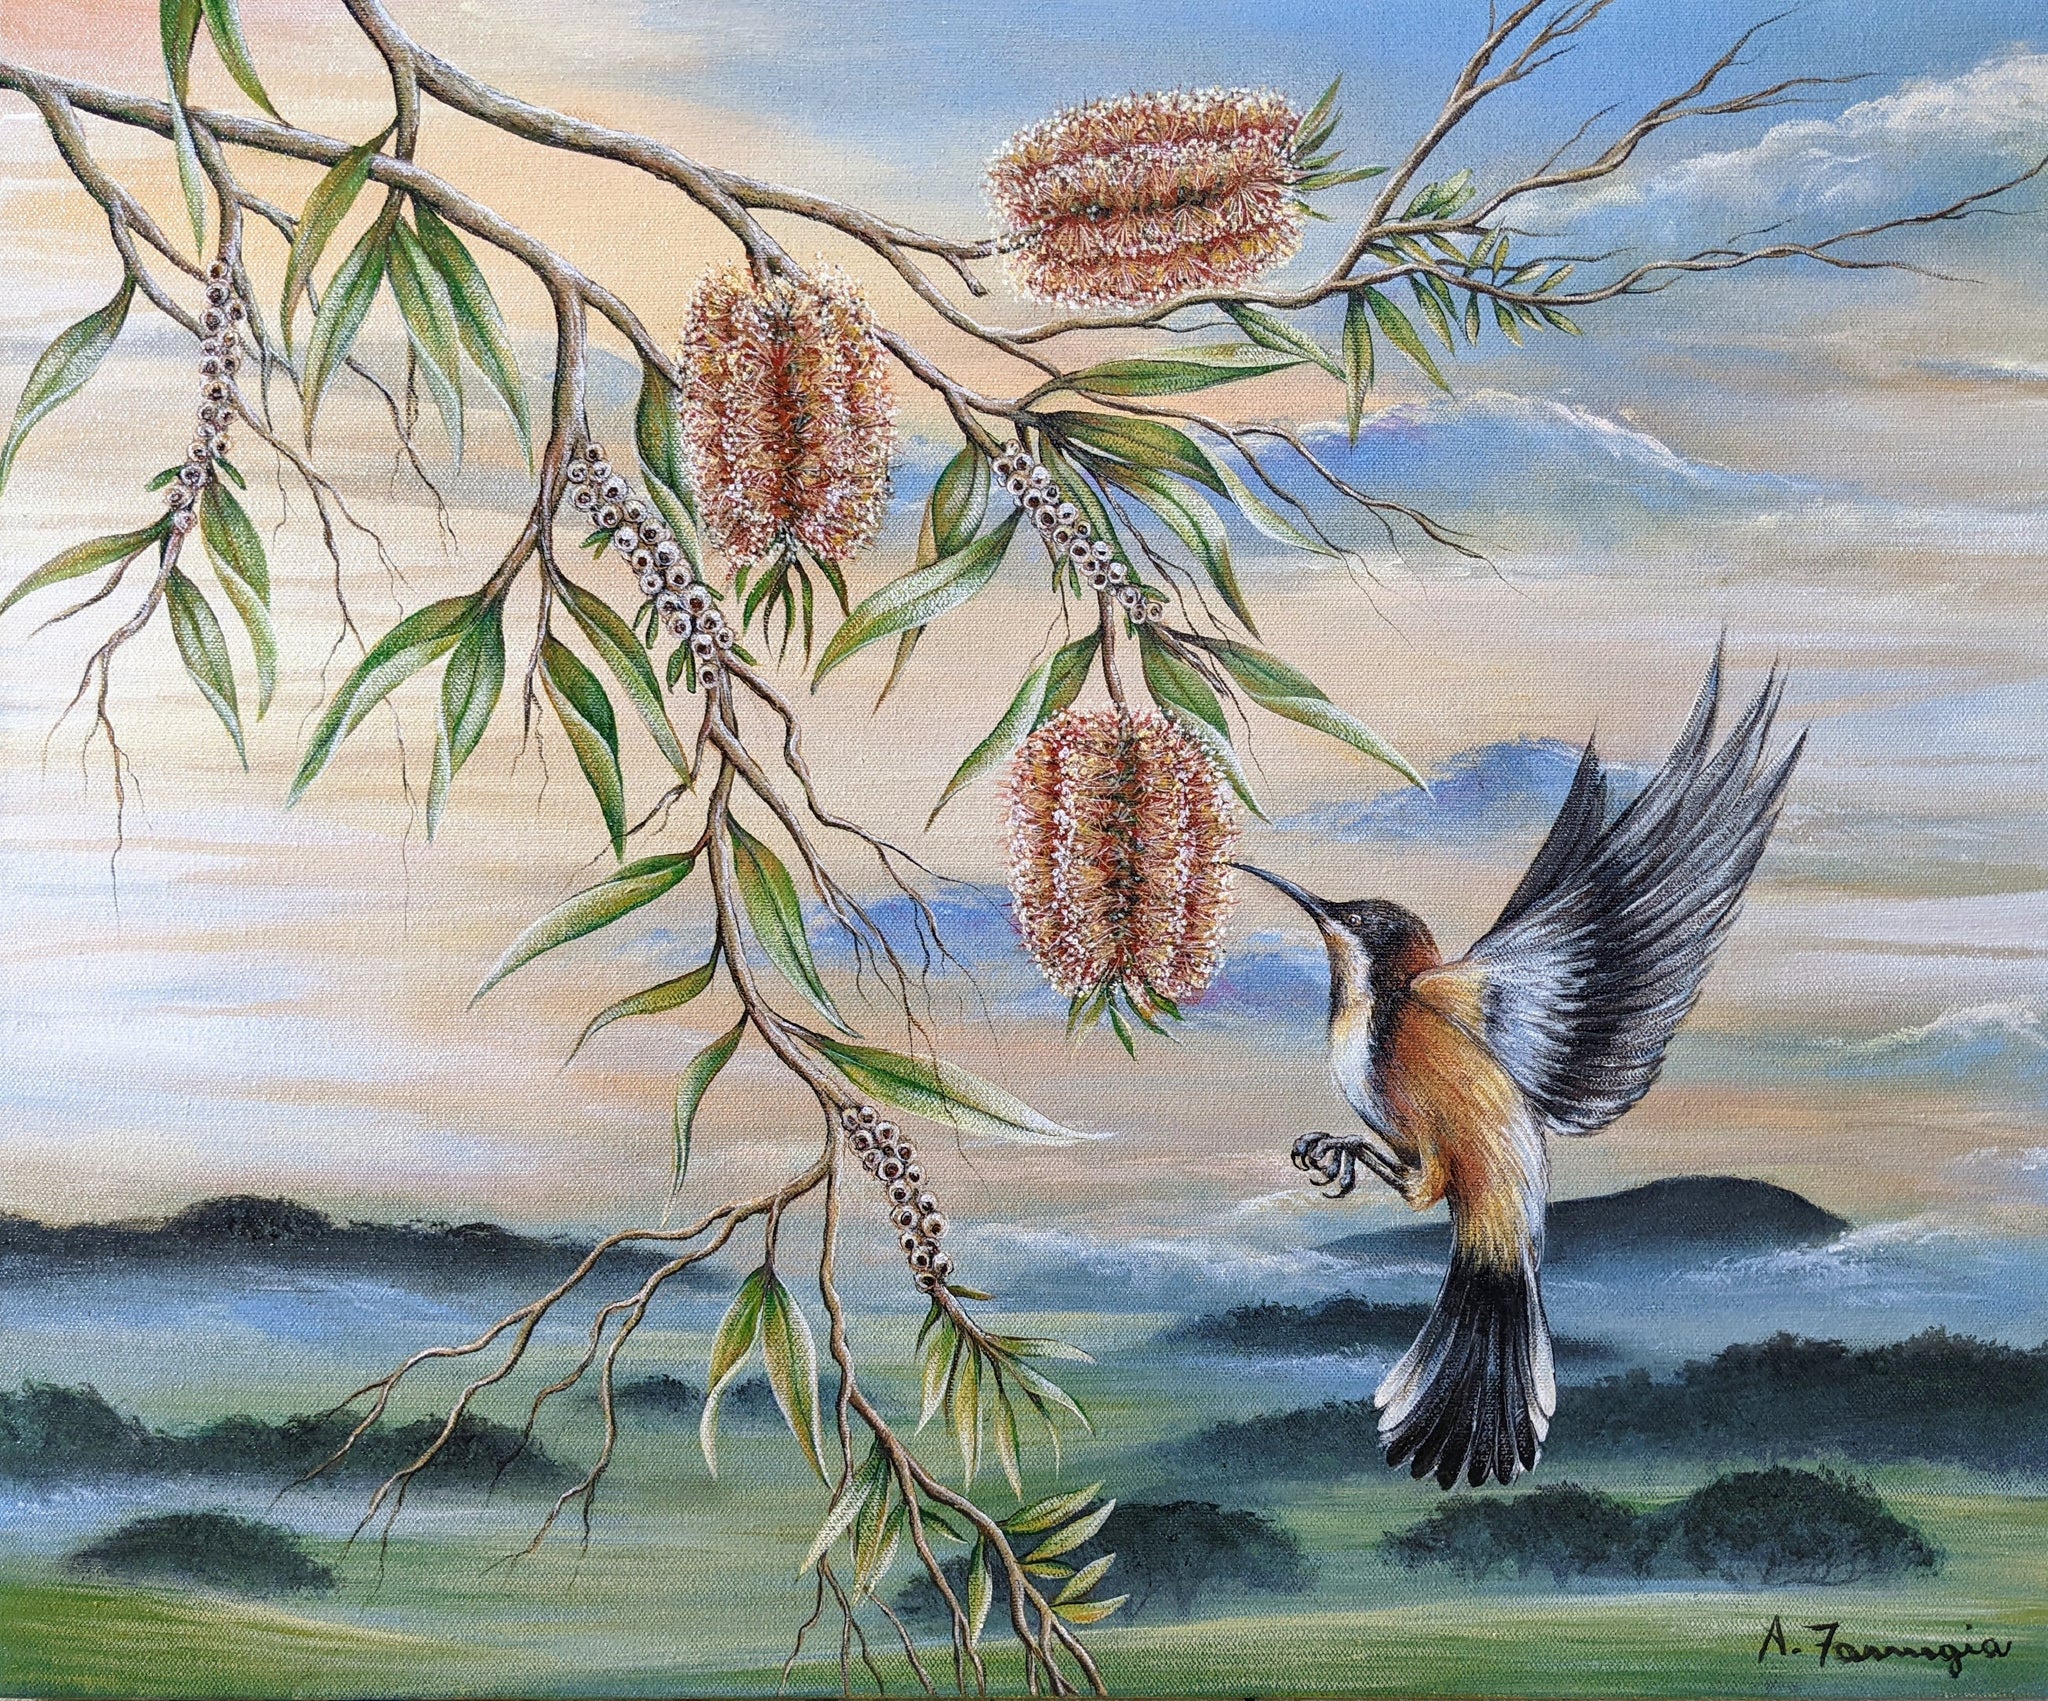 Nectar Of Life Is Nature 51 x 61 cm